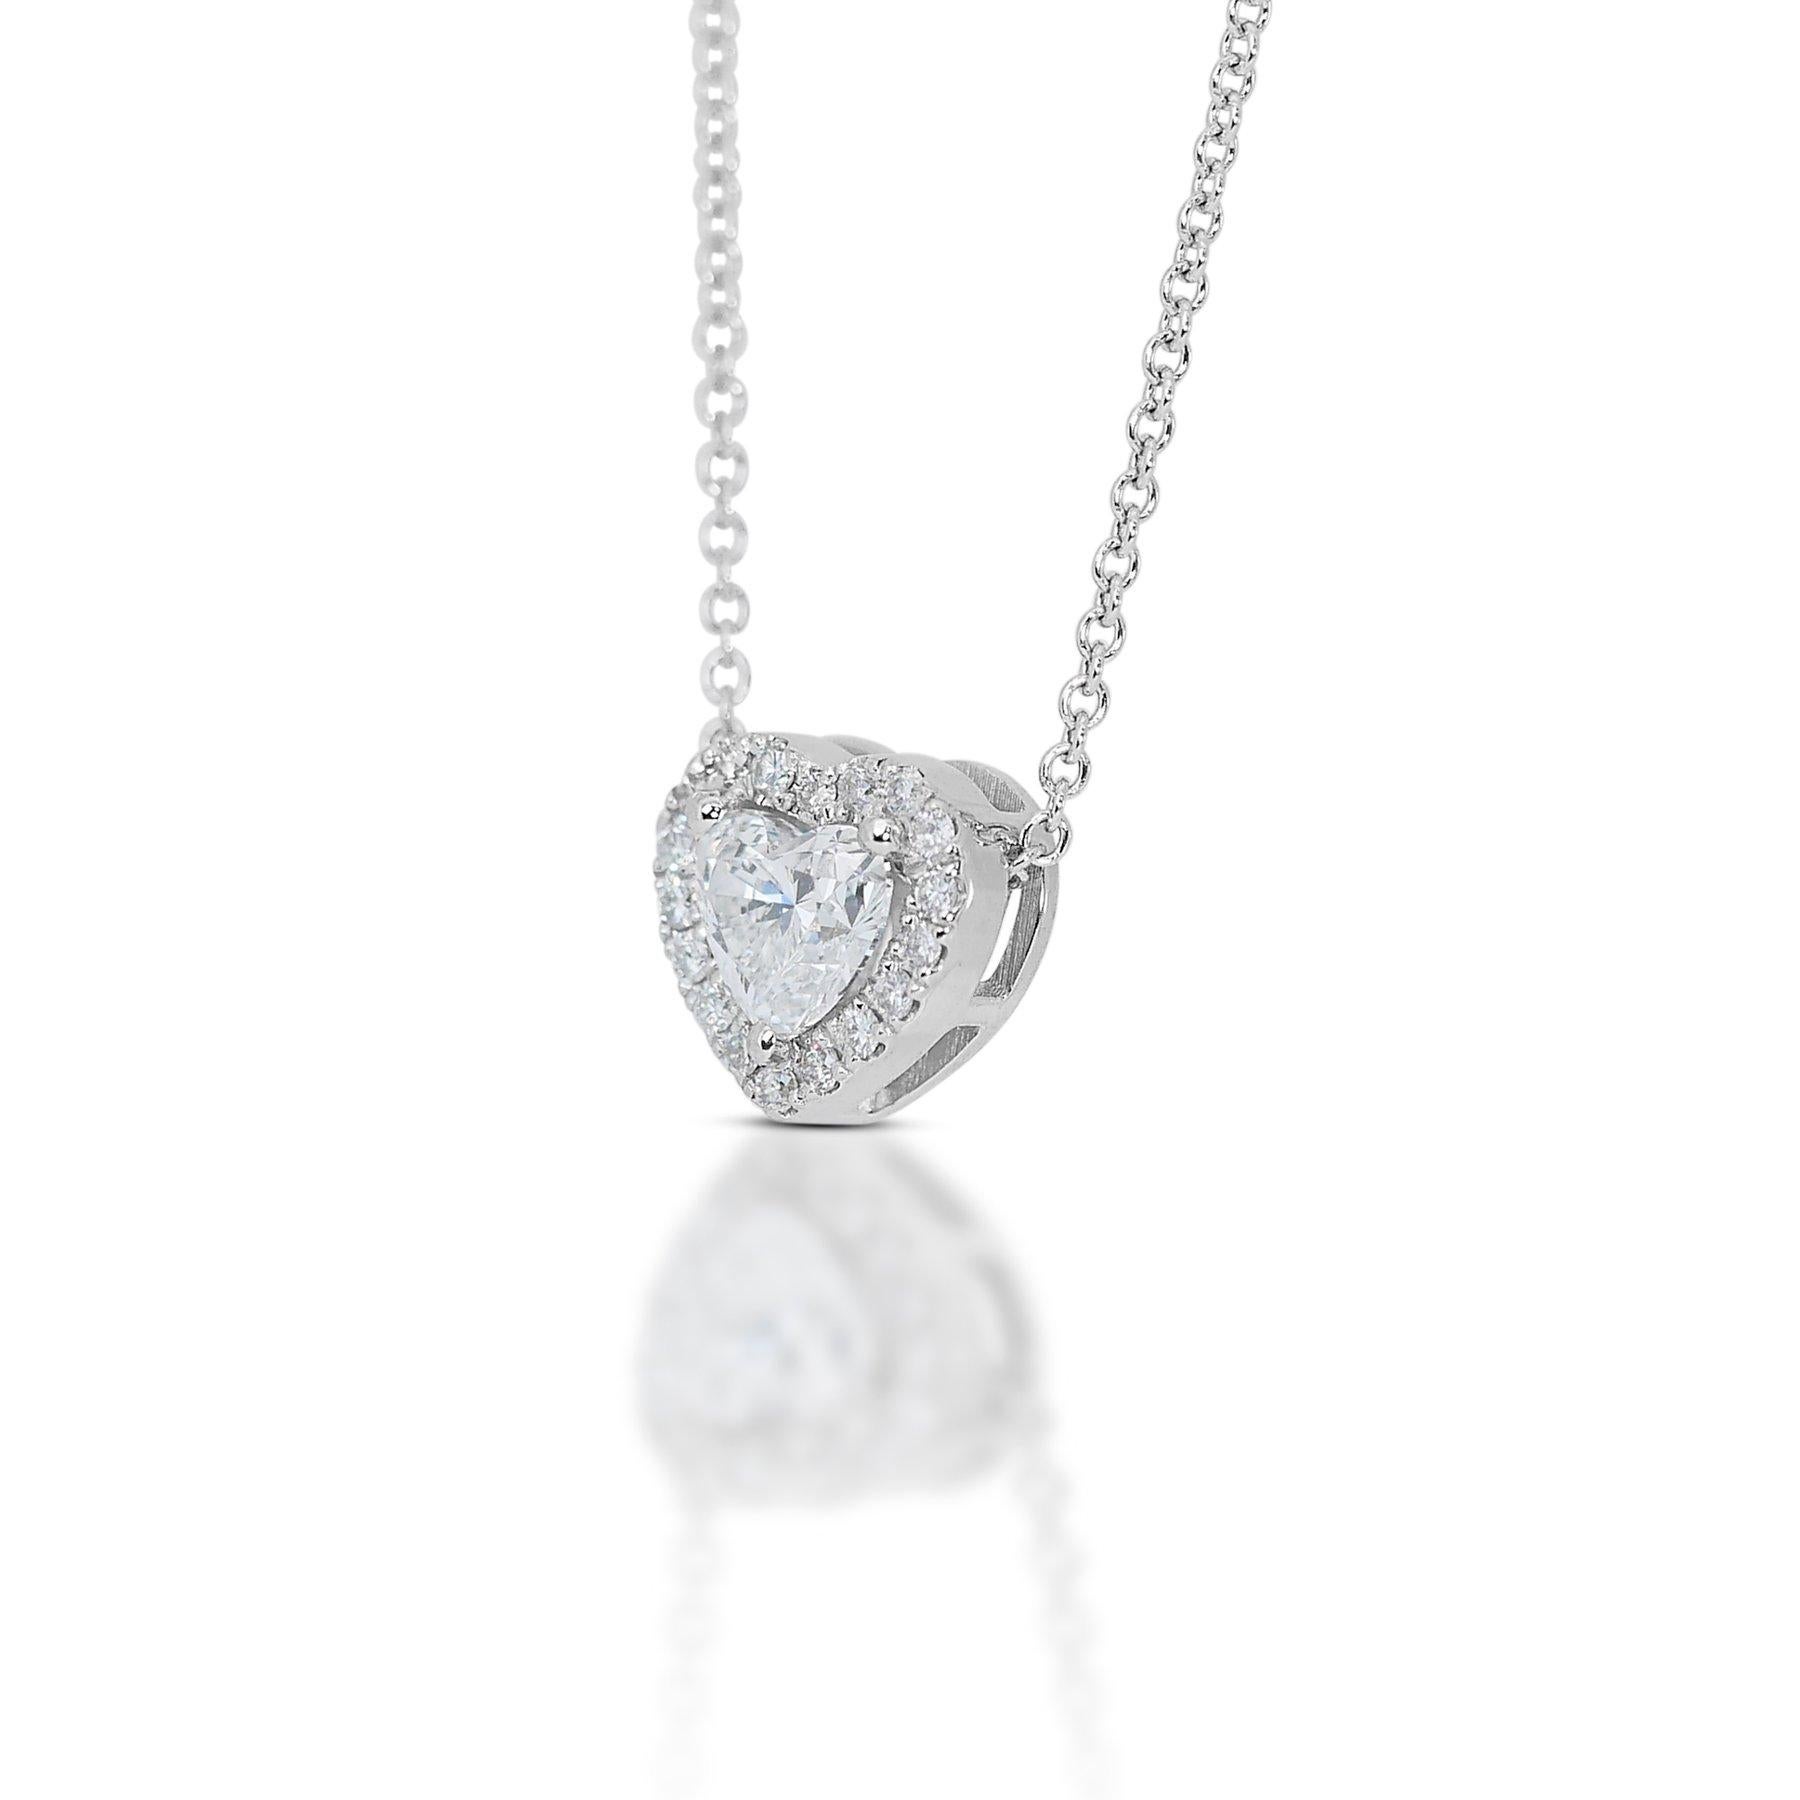 Round Cut Enchanting 1.14ct Diamonds Halo Necklace in 18k White Gold - GIA Certified For Sale